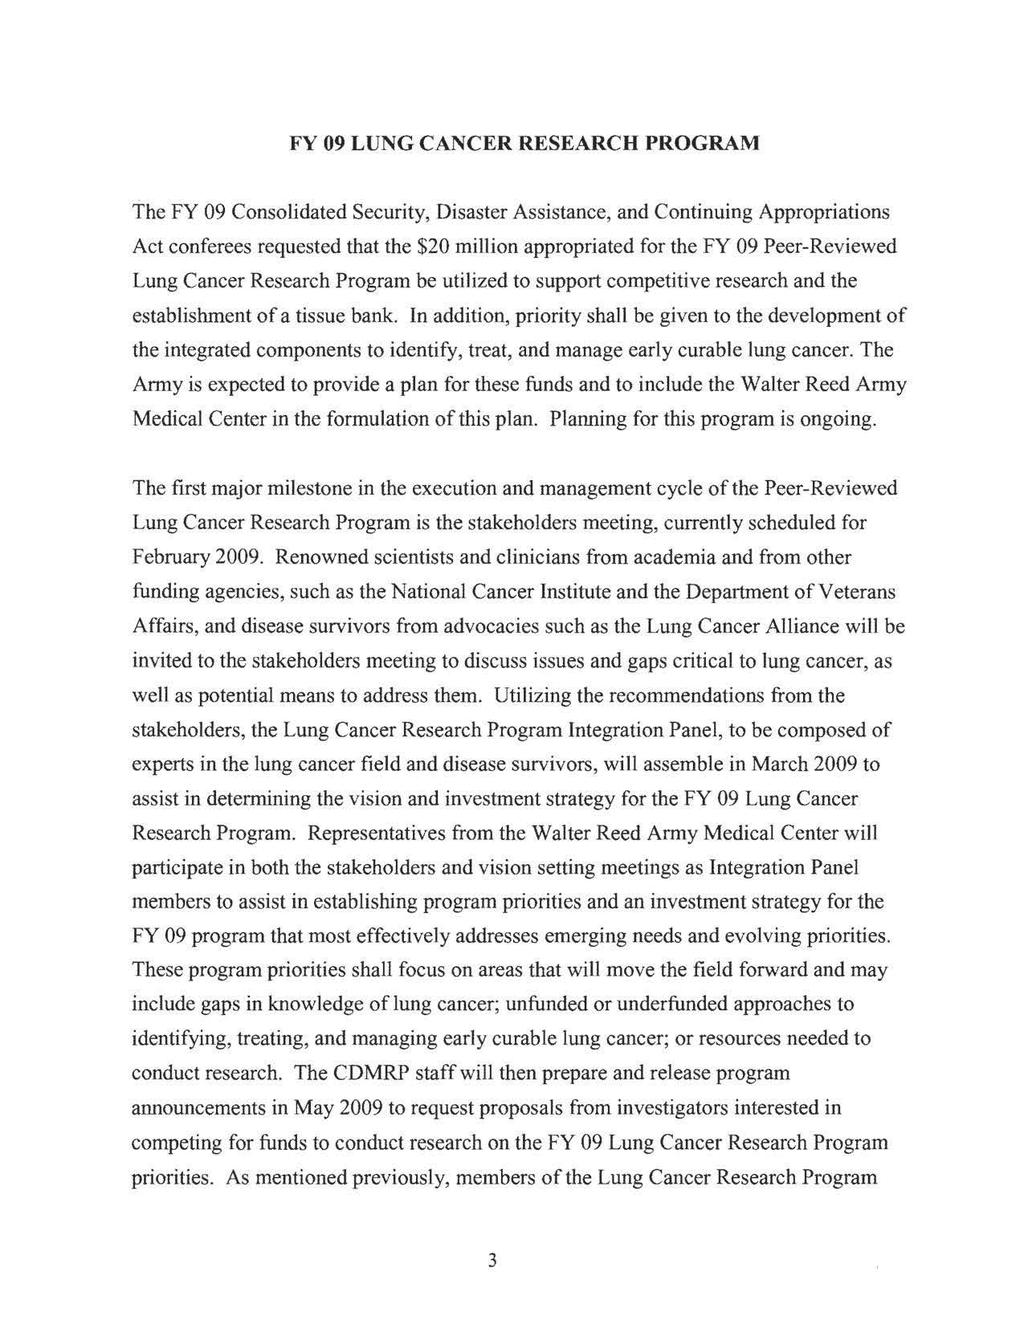 FY 09 LUNG CANCER RESEARCH PROGRAM The FY 09 Consolidated Security, Disaster Assistance, and Continuing Appropriations Act conferees requested that the $20 million appropriated for the FY 09